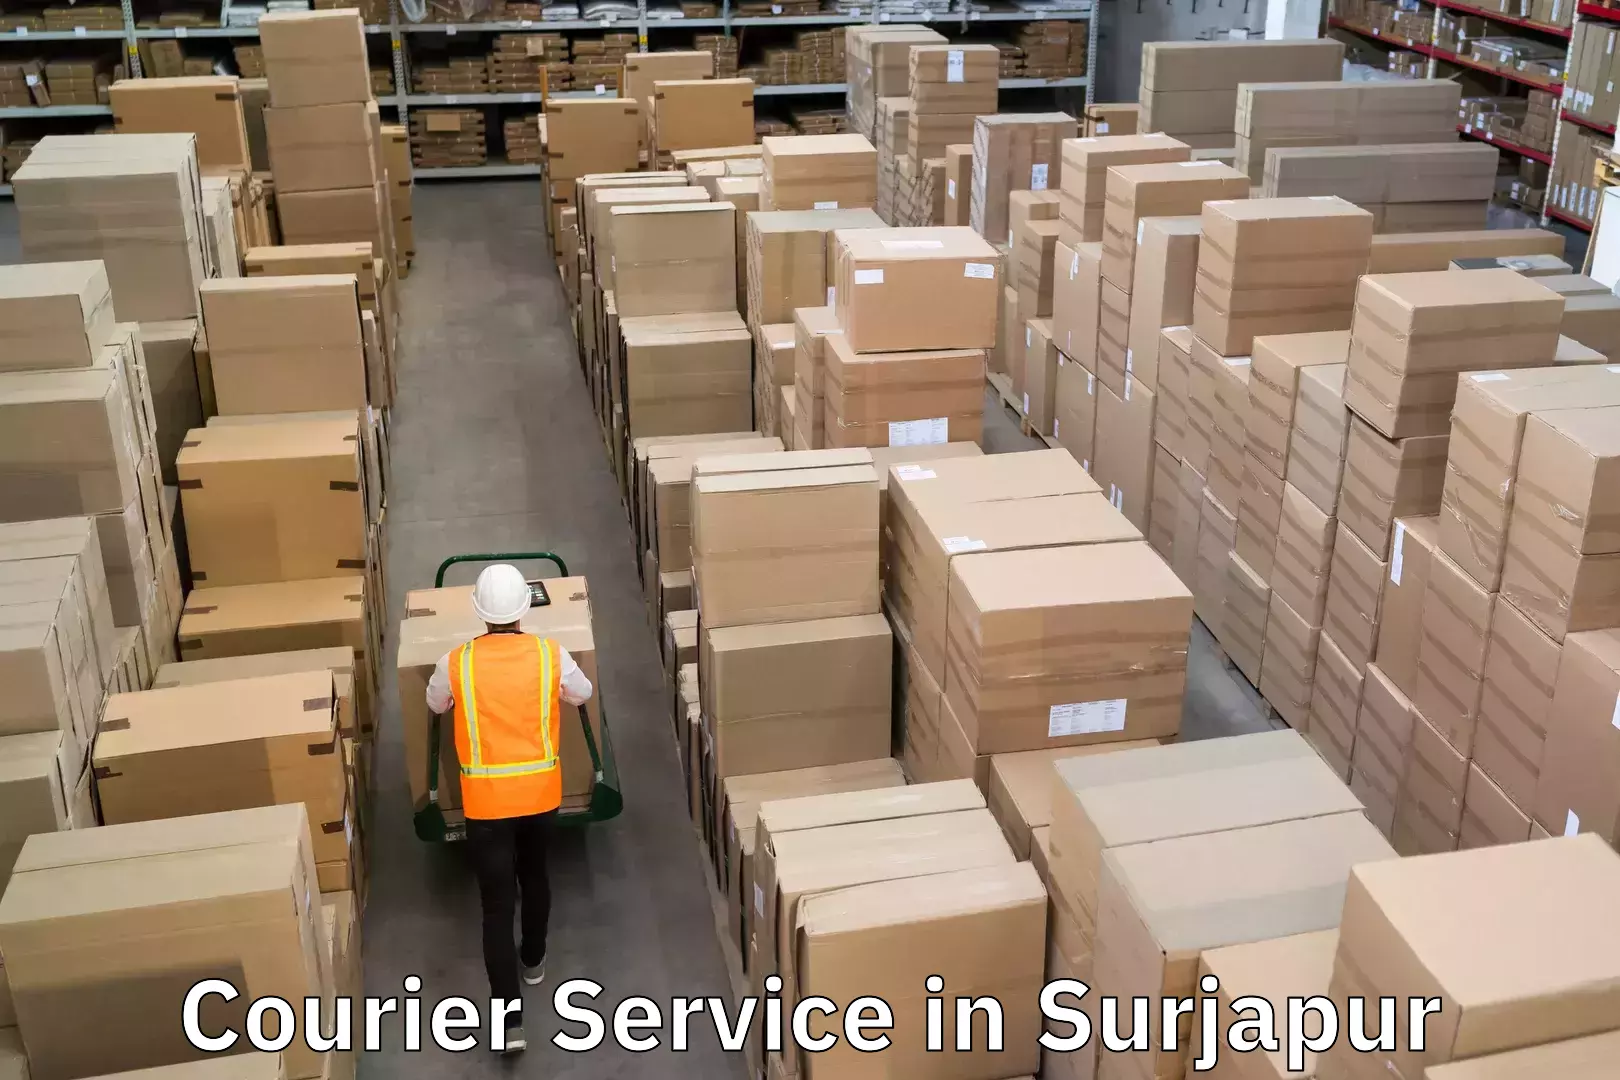 State-of-the-art courier technology in Surjapur